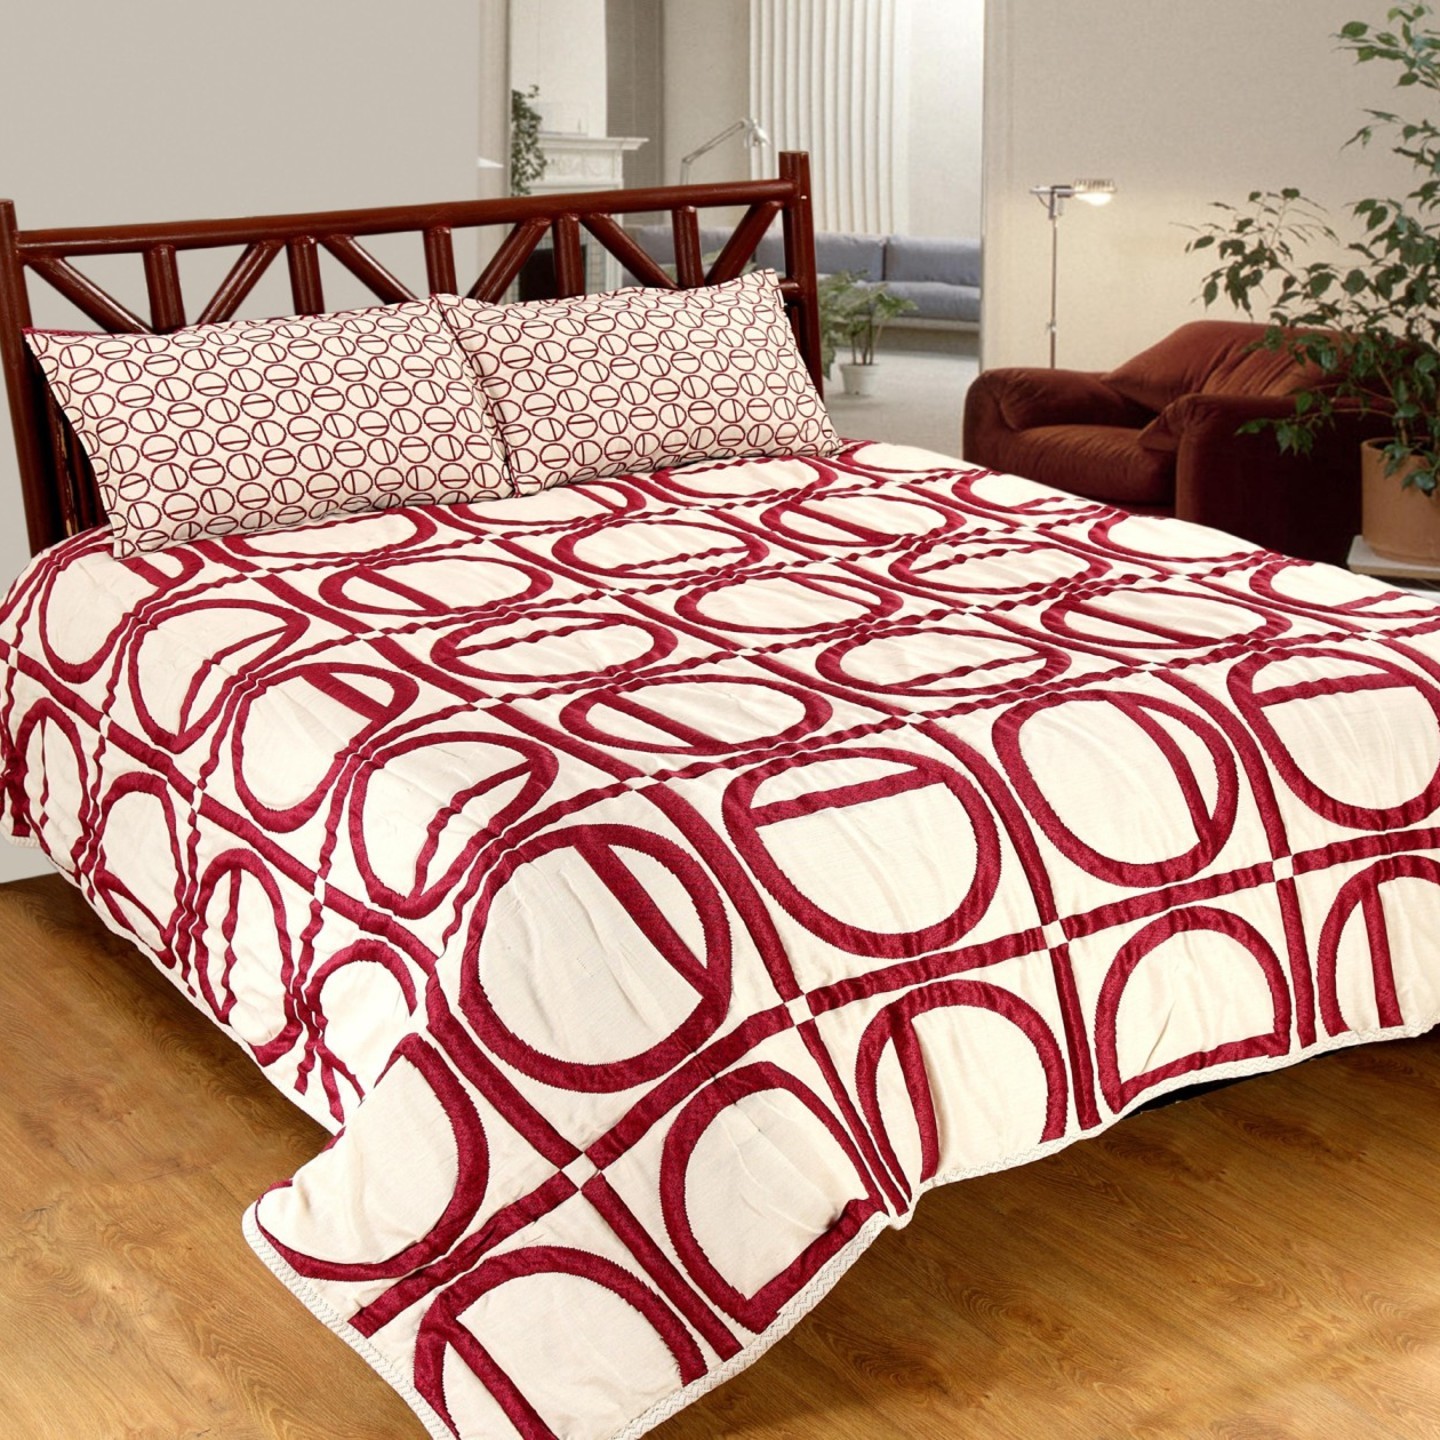 Handtex Home Quilted Double Bed Cover((बेड कवर)) Size 90x100 With Two Pillow Cover Maroon